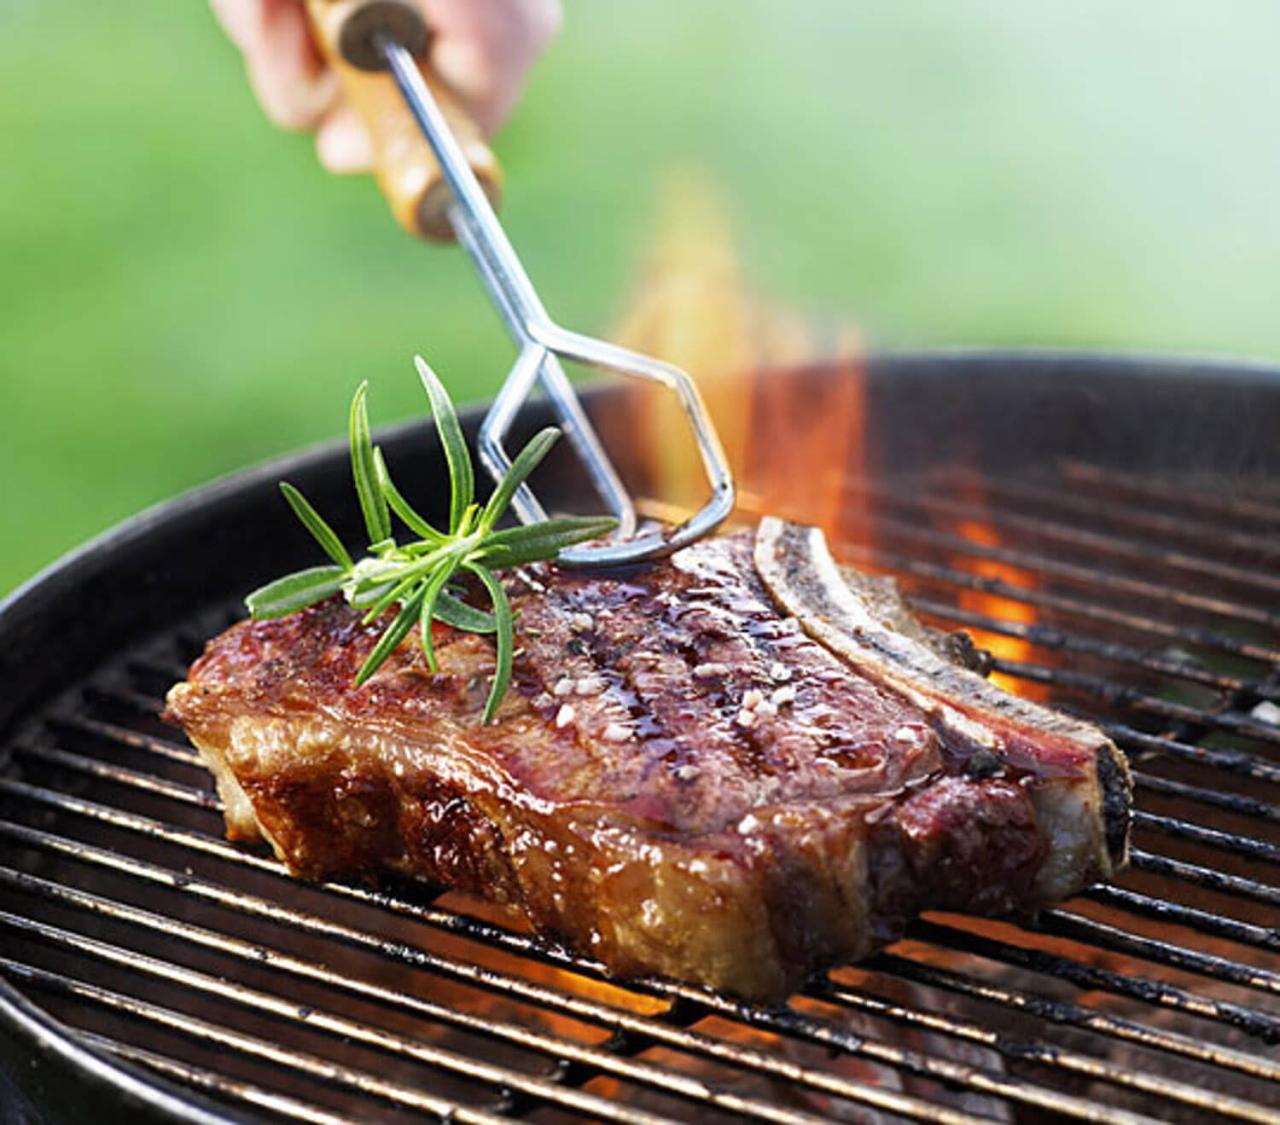 How To Grill A Steak